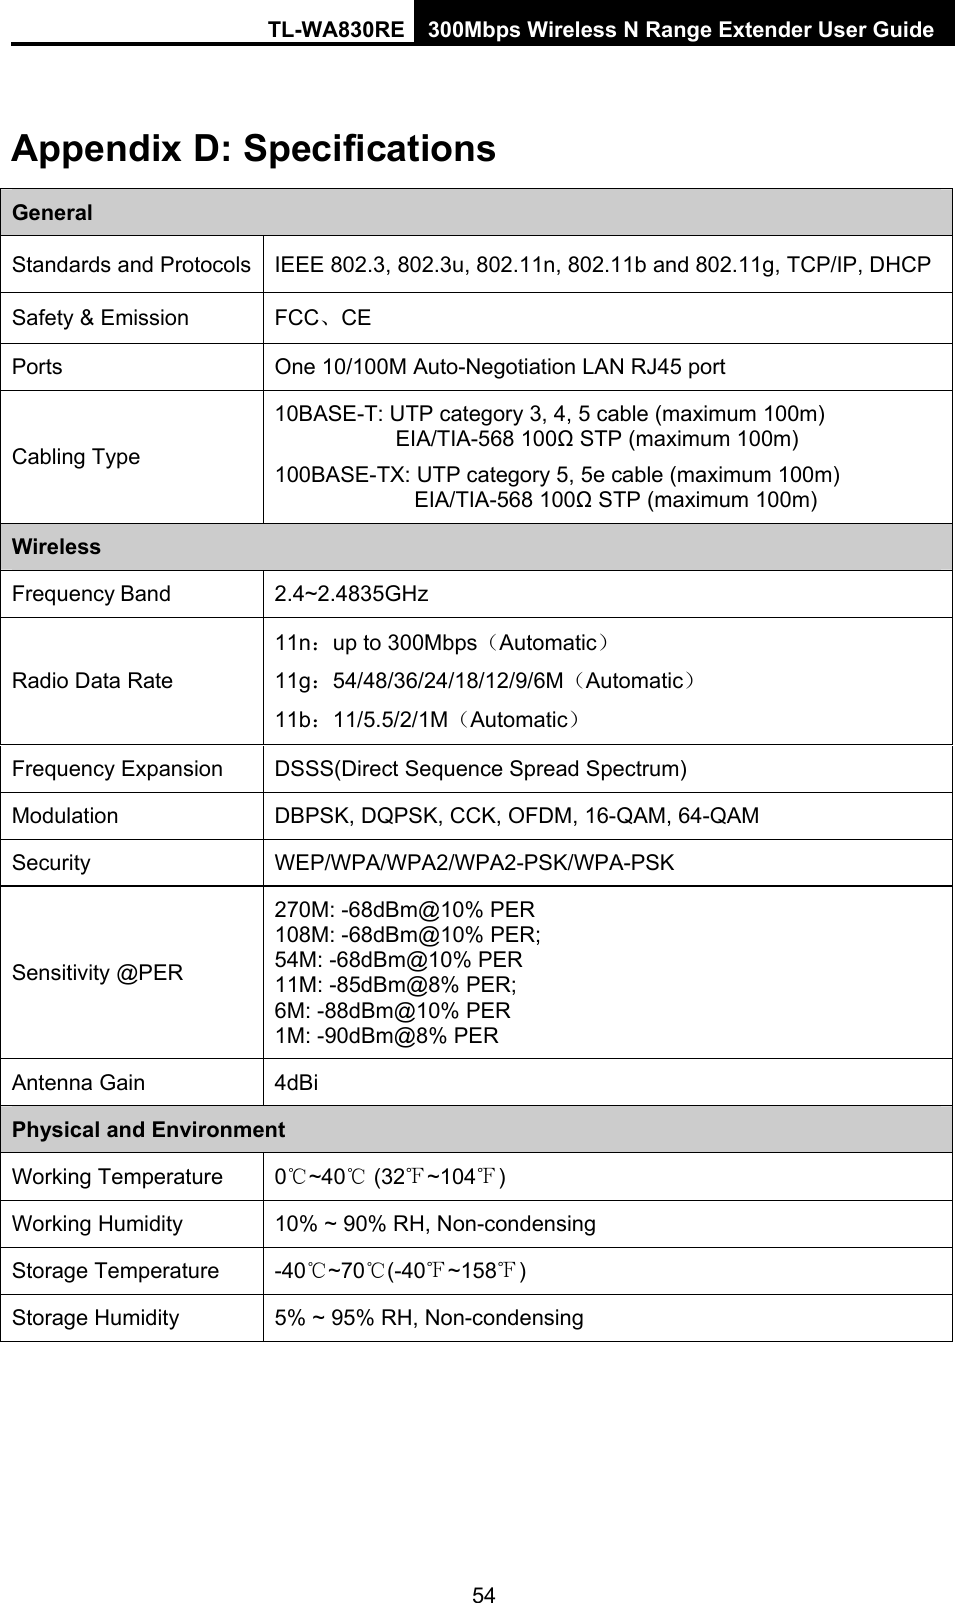 TL-WA830RE 300Mbps Wireless N Range Extender User Guide Appendix D: Specifications General Standards and Protocols  IEEE 802.3, 802.3u, 802.11n, 802.11b and 802.11g, TCP/IP, DHCP Safety &amp; Emission  FCC、CE Ports  One 10/100M Auto-Negotiation LAN RJ45 port Cabling Type 10BASE-T: UTP category 3, 4, 5 cable (maximum 100m) EIA/TIA-568 100Ω STP (maximum 100m) 100BASE-TX: UTP category 5, 5e cable (maximum 100m) EIA/TIA-568 100Ω STP (maximum 100m) Wireless Frequency Band 2.4~2.4835GHz Radio Data Rate 11n：up to 300Mbps（Automatic） 11g：54/48/36/24/18/12/9/6M（Automatic） 11b：11/5.5/2/1M（Automatic） Frequency Expansion  DSSS(Direct Sequence Spread Spectrum) Modulation  DBPSK, DQPSK, CCK, OFDM, 16-QAM, 64-QAM Security WEP/WPA/WPA2/WPA2-PSK/WPA-PSK Sensitivity @PER 270M: -68dBm@10% PER 108M: -68dBm@10% PER;   54M: -68dBm@10% PER 11M: -85dBm@8% PER;   6M: -88dBm@10% PER 1M: -90dBm@8% PER Antenna Gain  4dBi Physical and Environment Working Temperature 0℃~40  (32℃~1℉04℉) Working Humidity  10% ~ 90% RH, Non-condensing Storage Temperature  -40 ~70 (℃℃-40 ~158℉)℉ Storage Humidity  5% ~ 95% RH, Non-condensing  54 